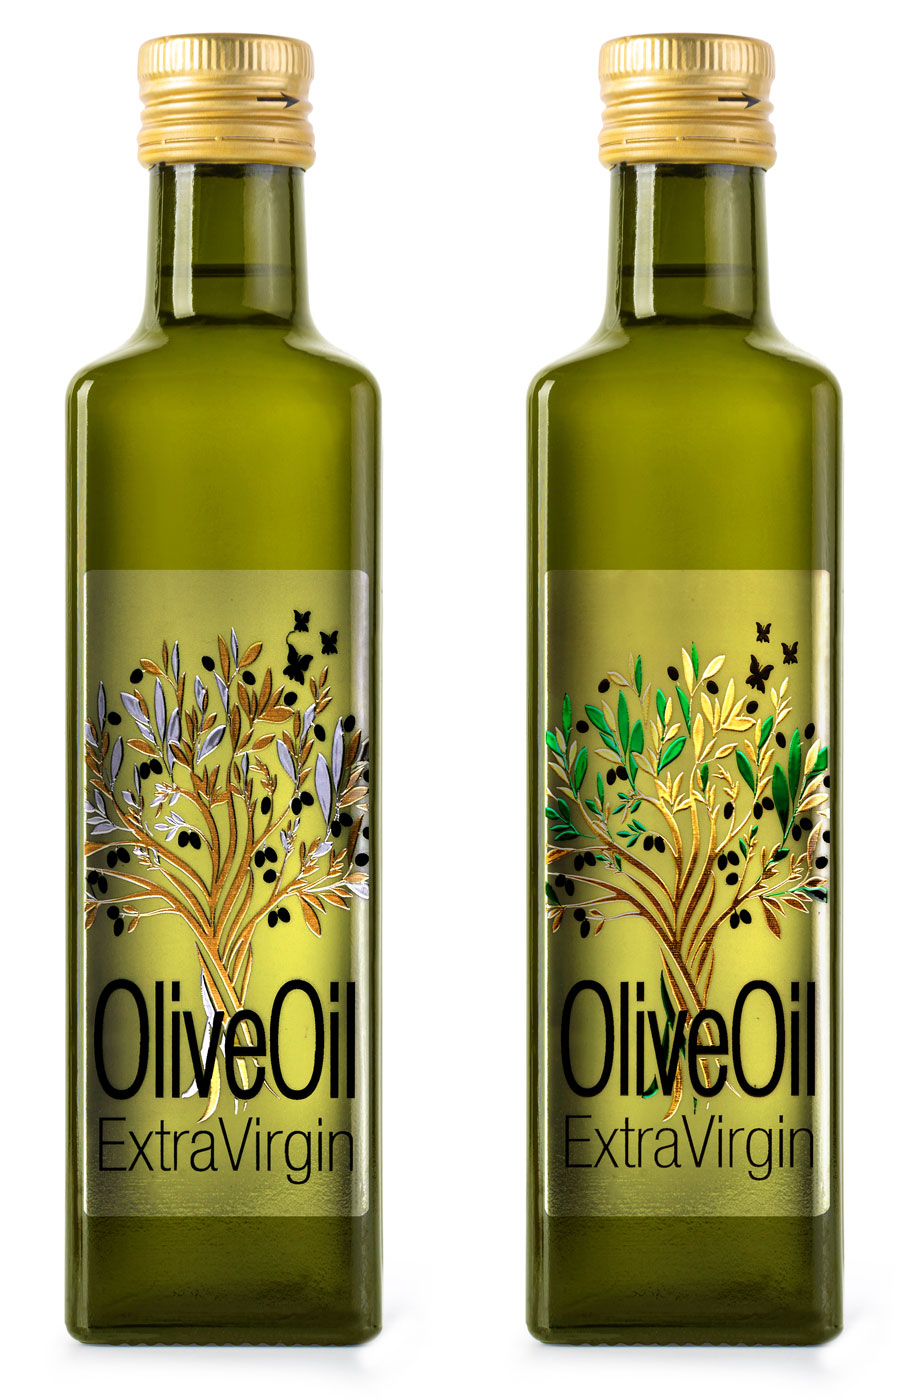 Photo of olive oil food labels, with text embellished in varnish and trees in green and gold gilding - printed and embellished on an MGI Digital Technology press